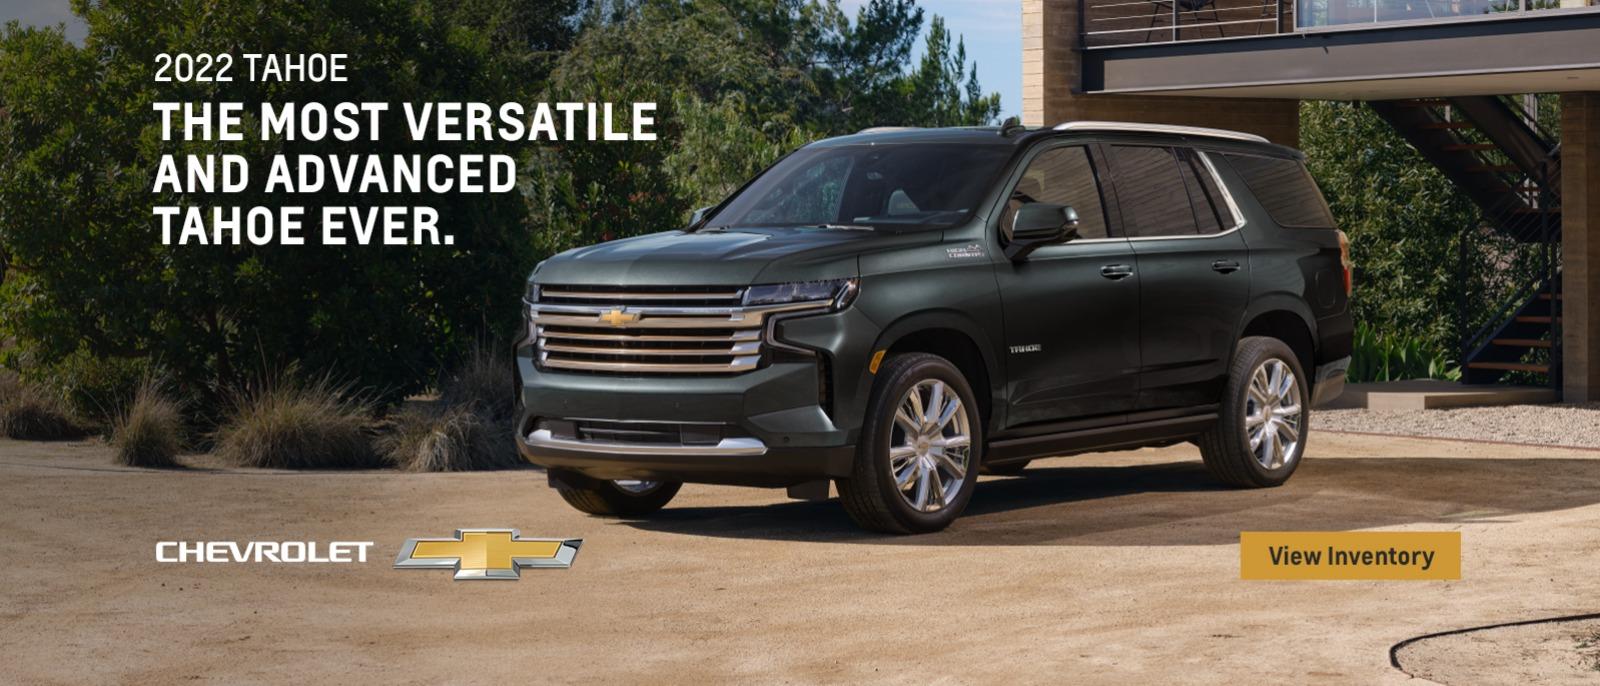 2022 Chevy Tahoe. The most versatile and advanced Tahoe ever.